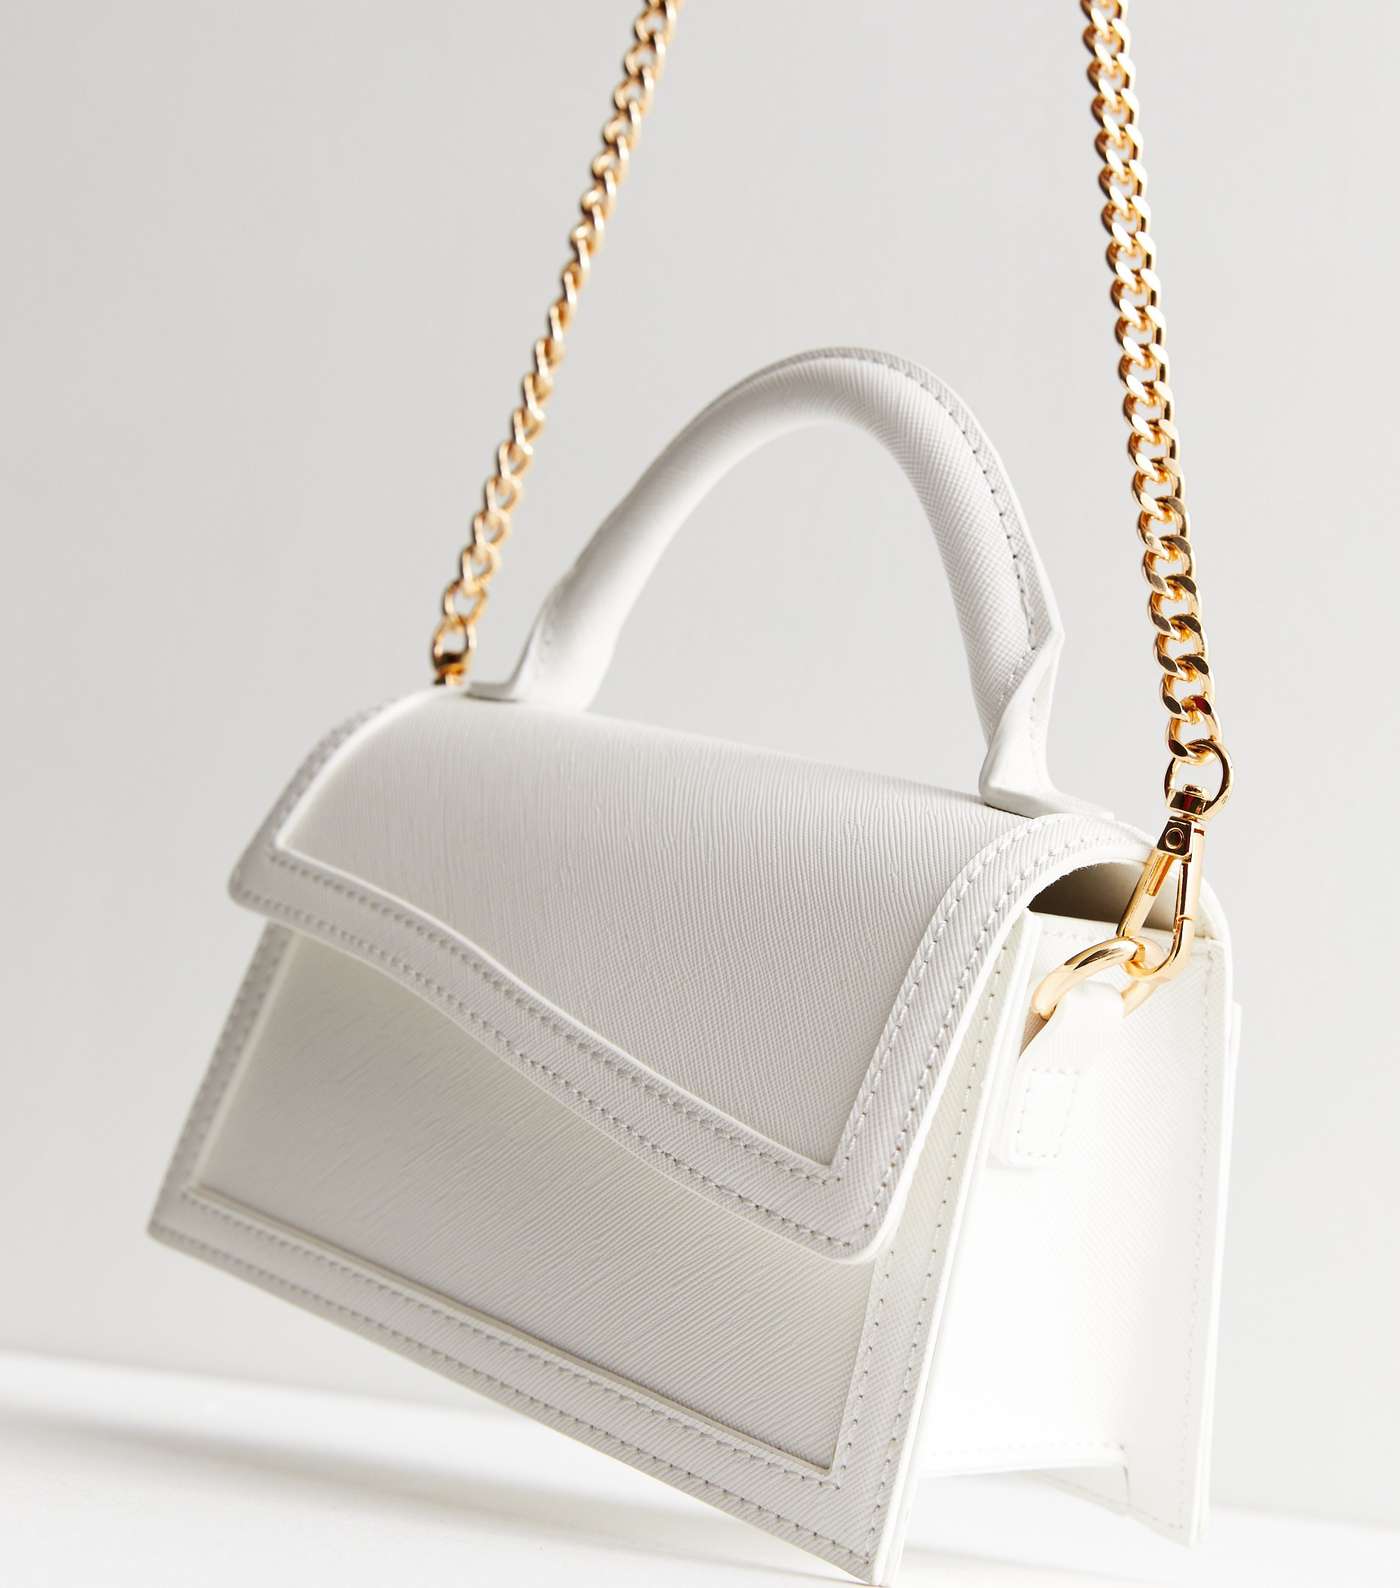 White Leather-Look Asymmetric Top Handle Bag Image 3